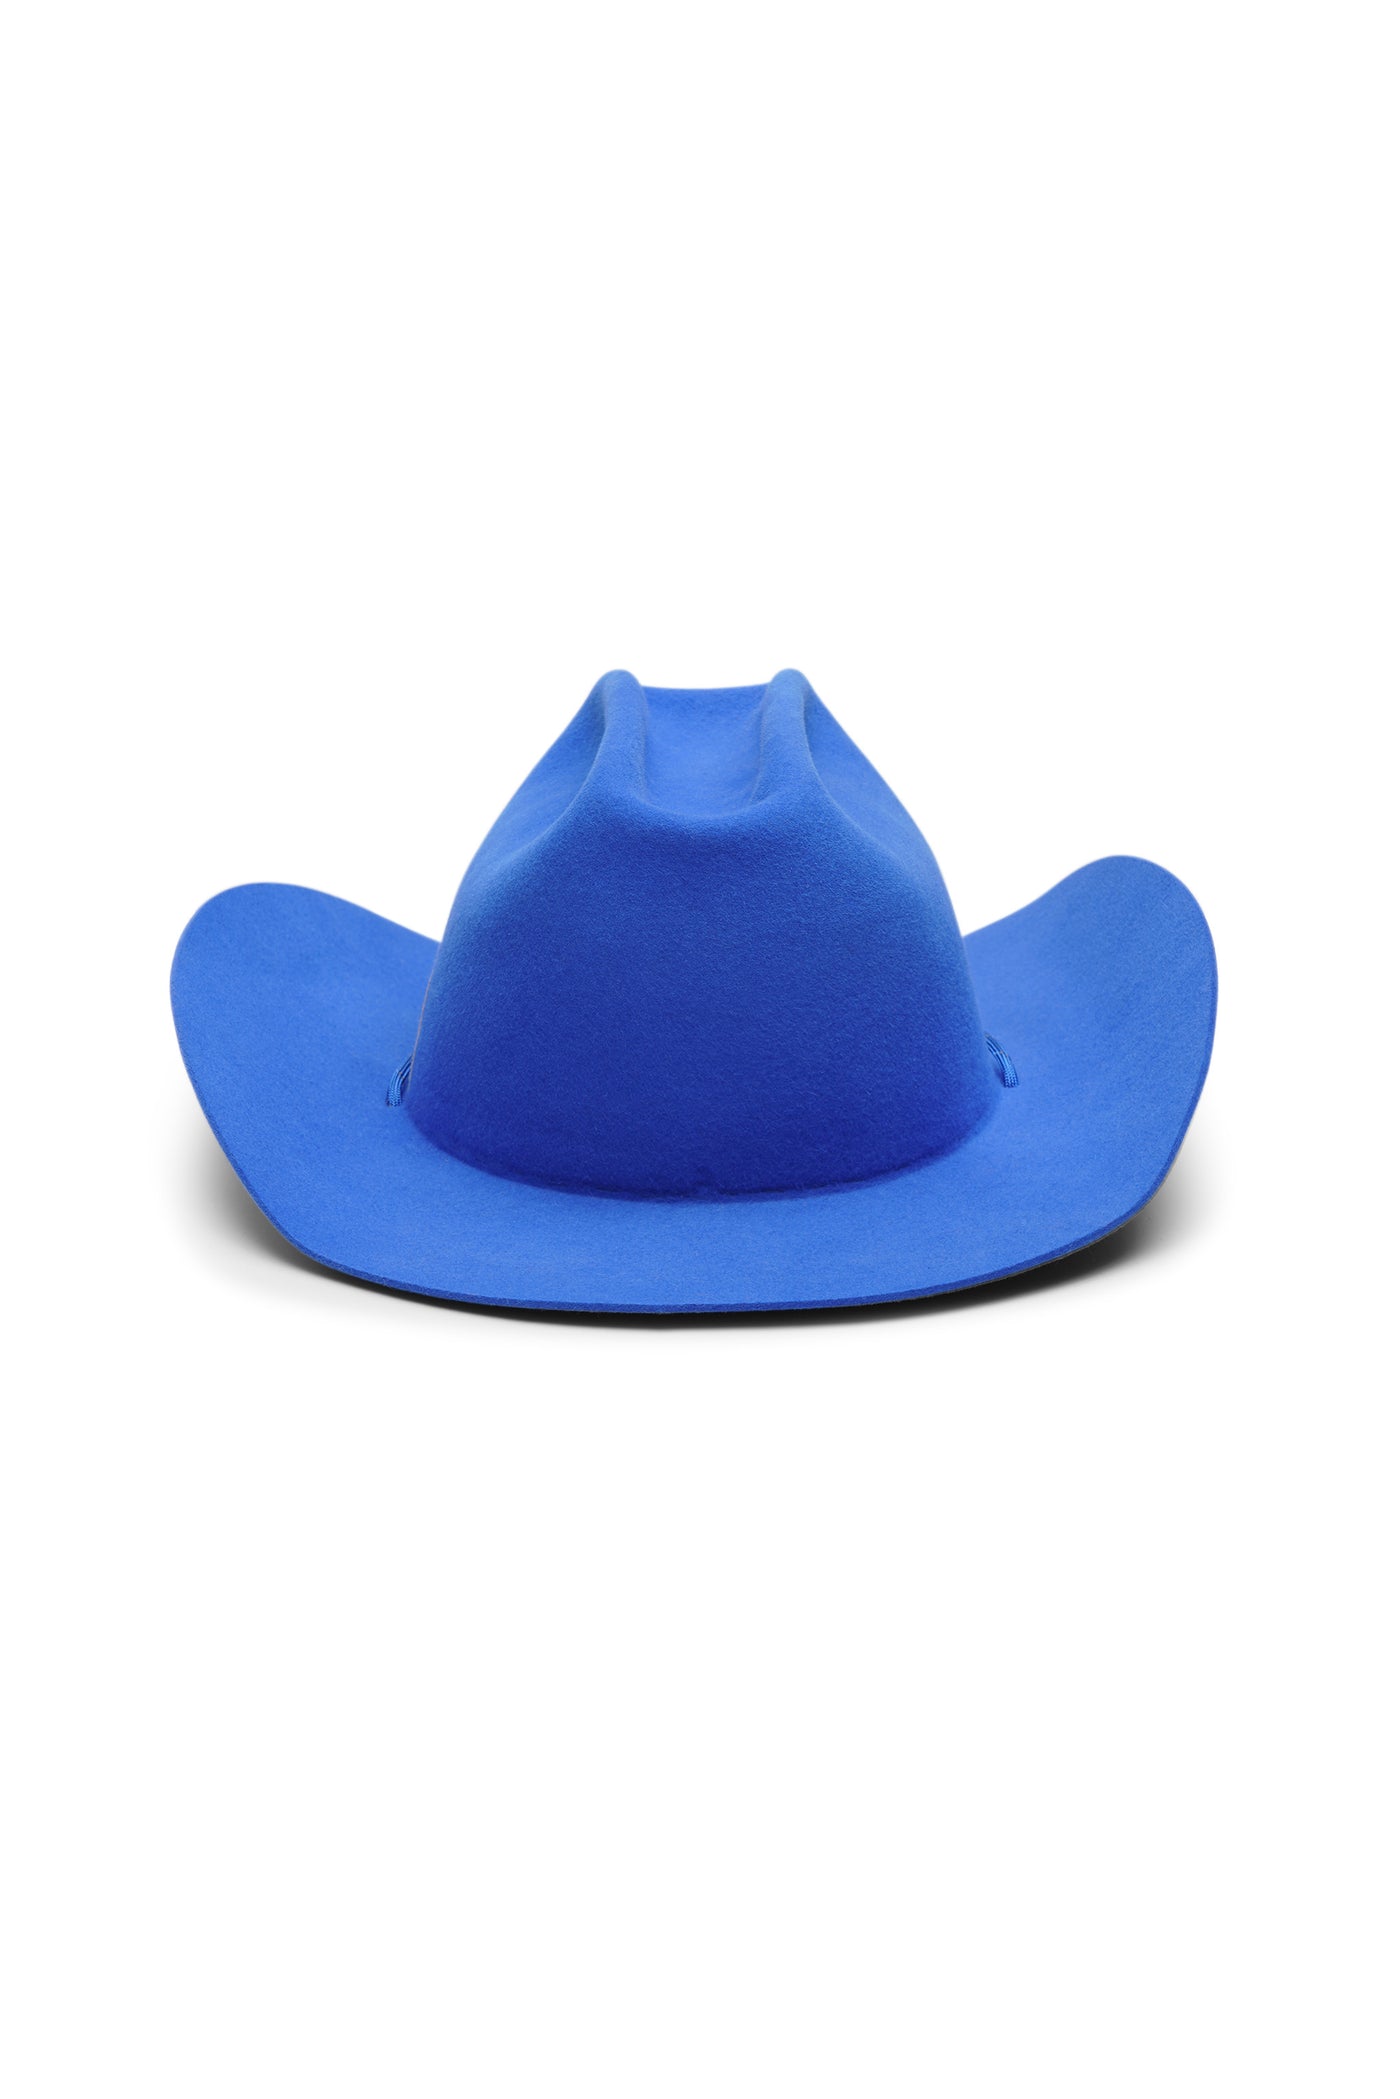 Unisex blue fur felt cowboy hat with a wide brim and center crease. Reflective paracord chin strap detail in blue, handcrafted by SoonNoon in Stockholm